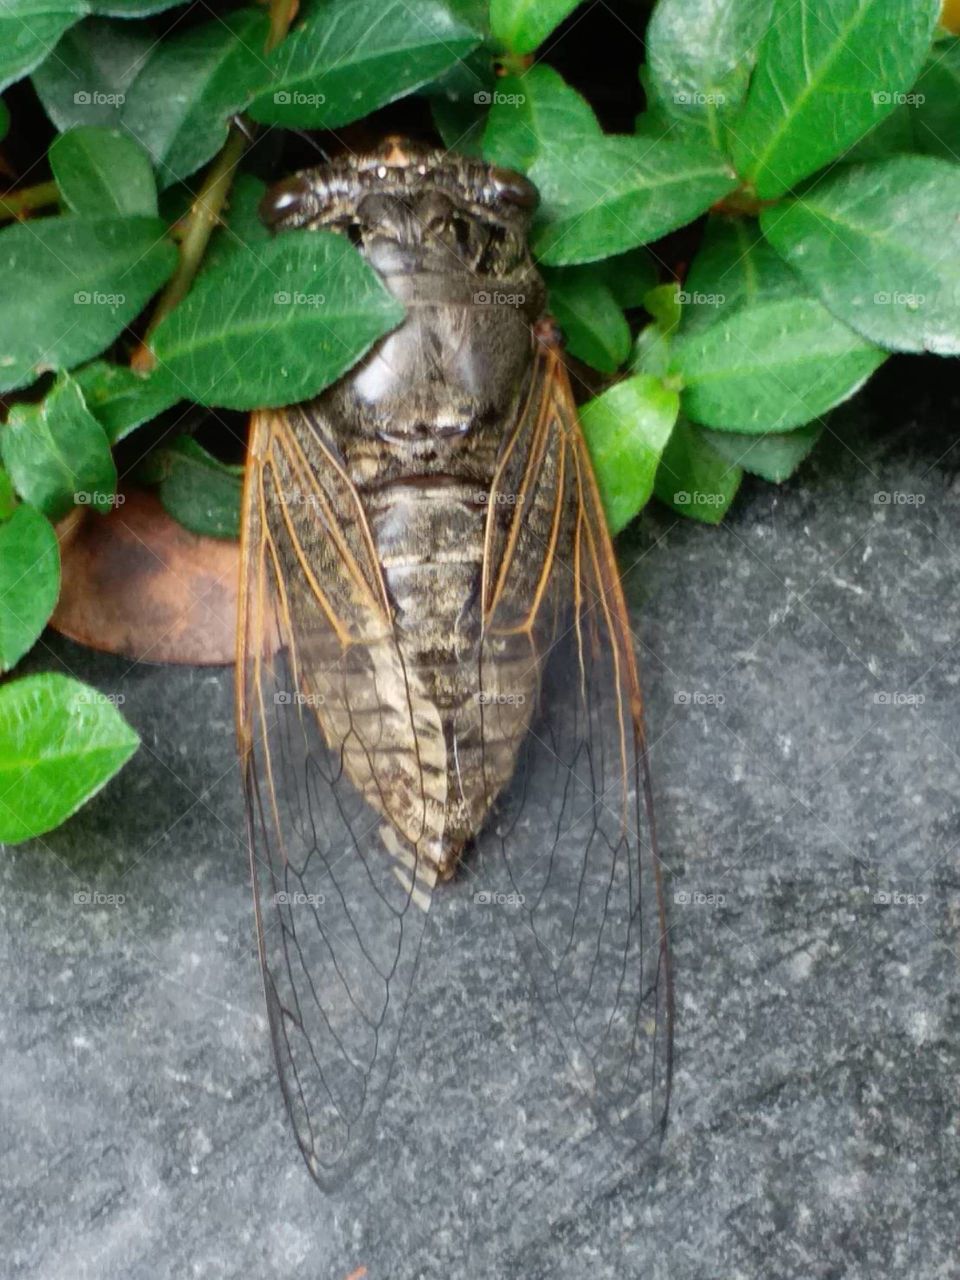 It's summer time to see the cicada